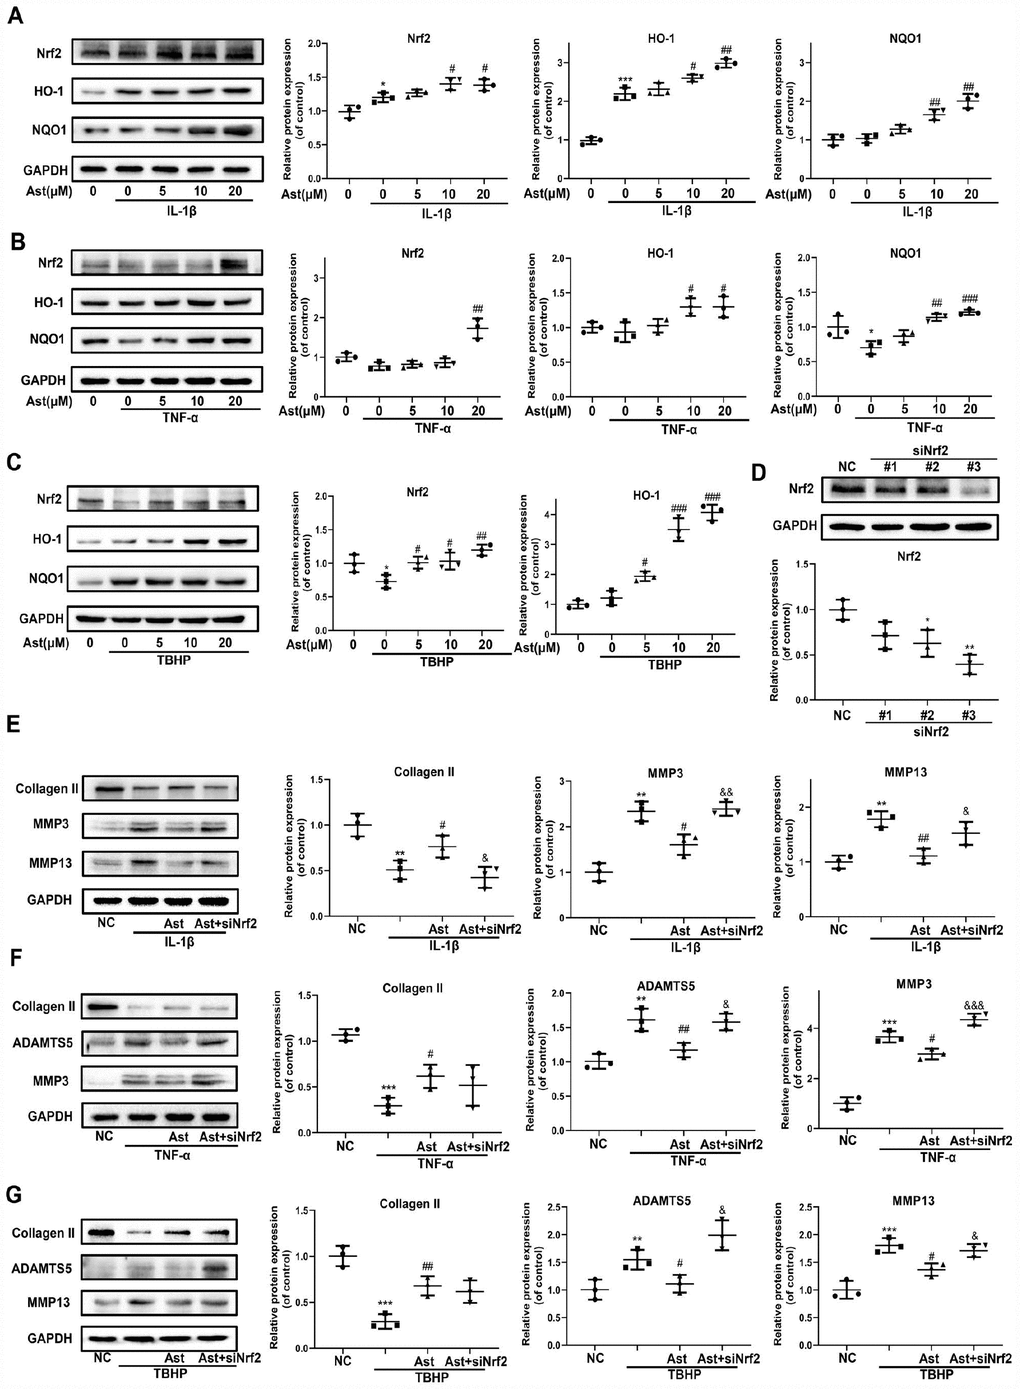 Nrf2 signaling mediated protective effects of Ast on OA chondrocytes. Chondrocytes were cultured with vehicle or Ast (5, 10 and 20 μM) for 2 h, then stimulated with IL-1β (5 ng/ml), TNF-α (5 ng/ml) or TBHP (100 μM). (A–C) Levels of Nrf2 signaling pathway proteins, including Nrf2, HO-1, and NQO1 were determined by western blotting and quantified. To knock down Nrf2 expression, chondrocytes were transfected with Nrf2 siRNA using Lipofectamine 3000. (D) Transfection efficiency was evaluated by detecting Nrf2 expression using western blotting. After 24h of transfection, chondrocytes were treated with vehicle or Ast (10 μM) for 2 h followed by stimulation with IL-1β (5 ng/ml) for 24 h. (E, F) The expression of Collagen II, ADAMTS5, MMP3, and MMP13 was measured by western blotting and quantified. The data are presented as dot plots from three independent experiments. Significant differences among different groups are indicated as *p